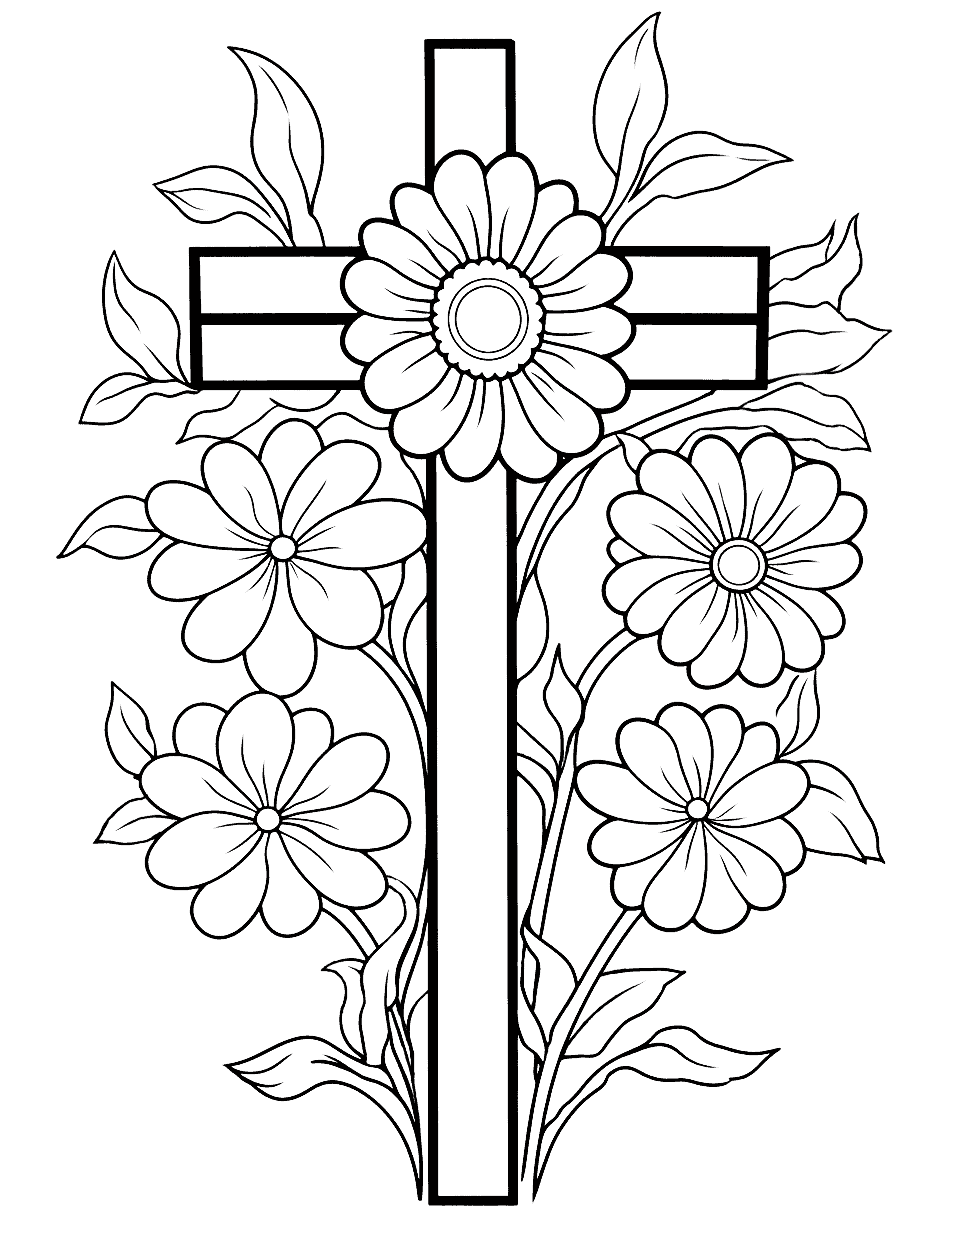 Cross with Flowers Easter Coloring Page - A cross embellished with vibrant flowers symbolizing the resurrection and renewal that Easter represents.